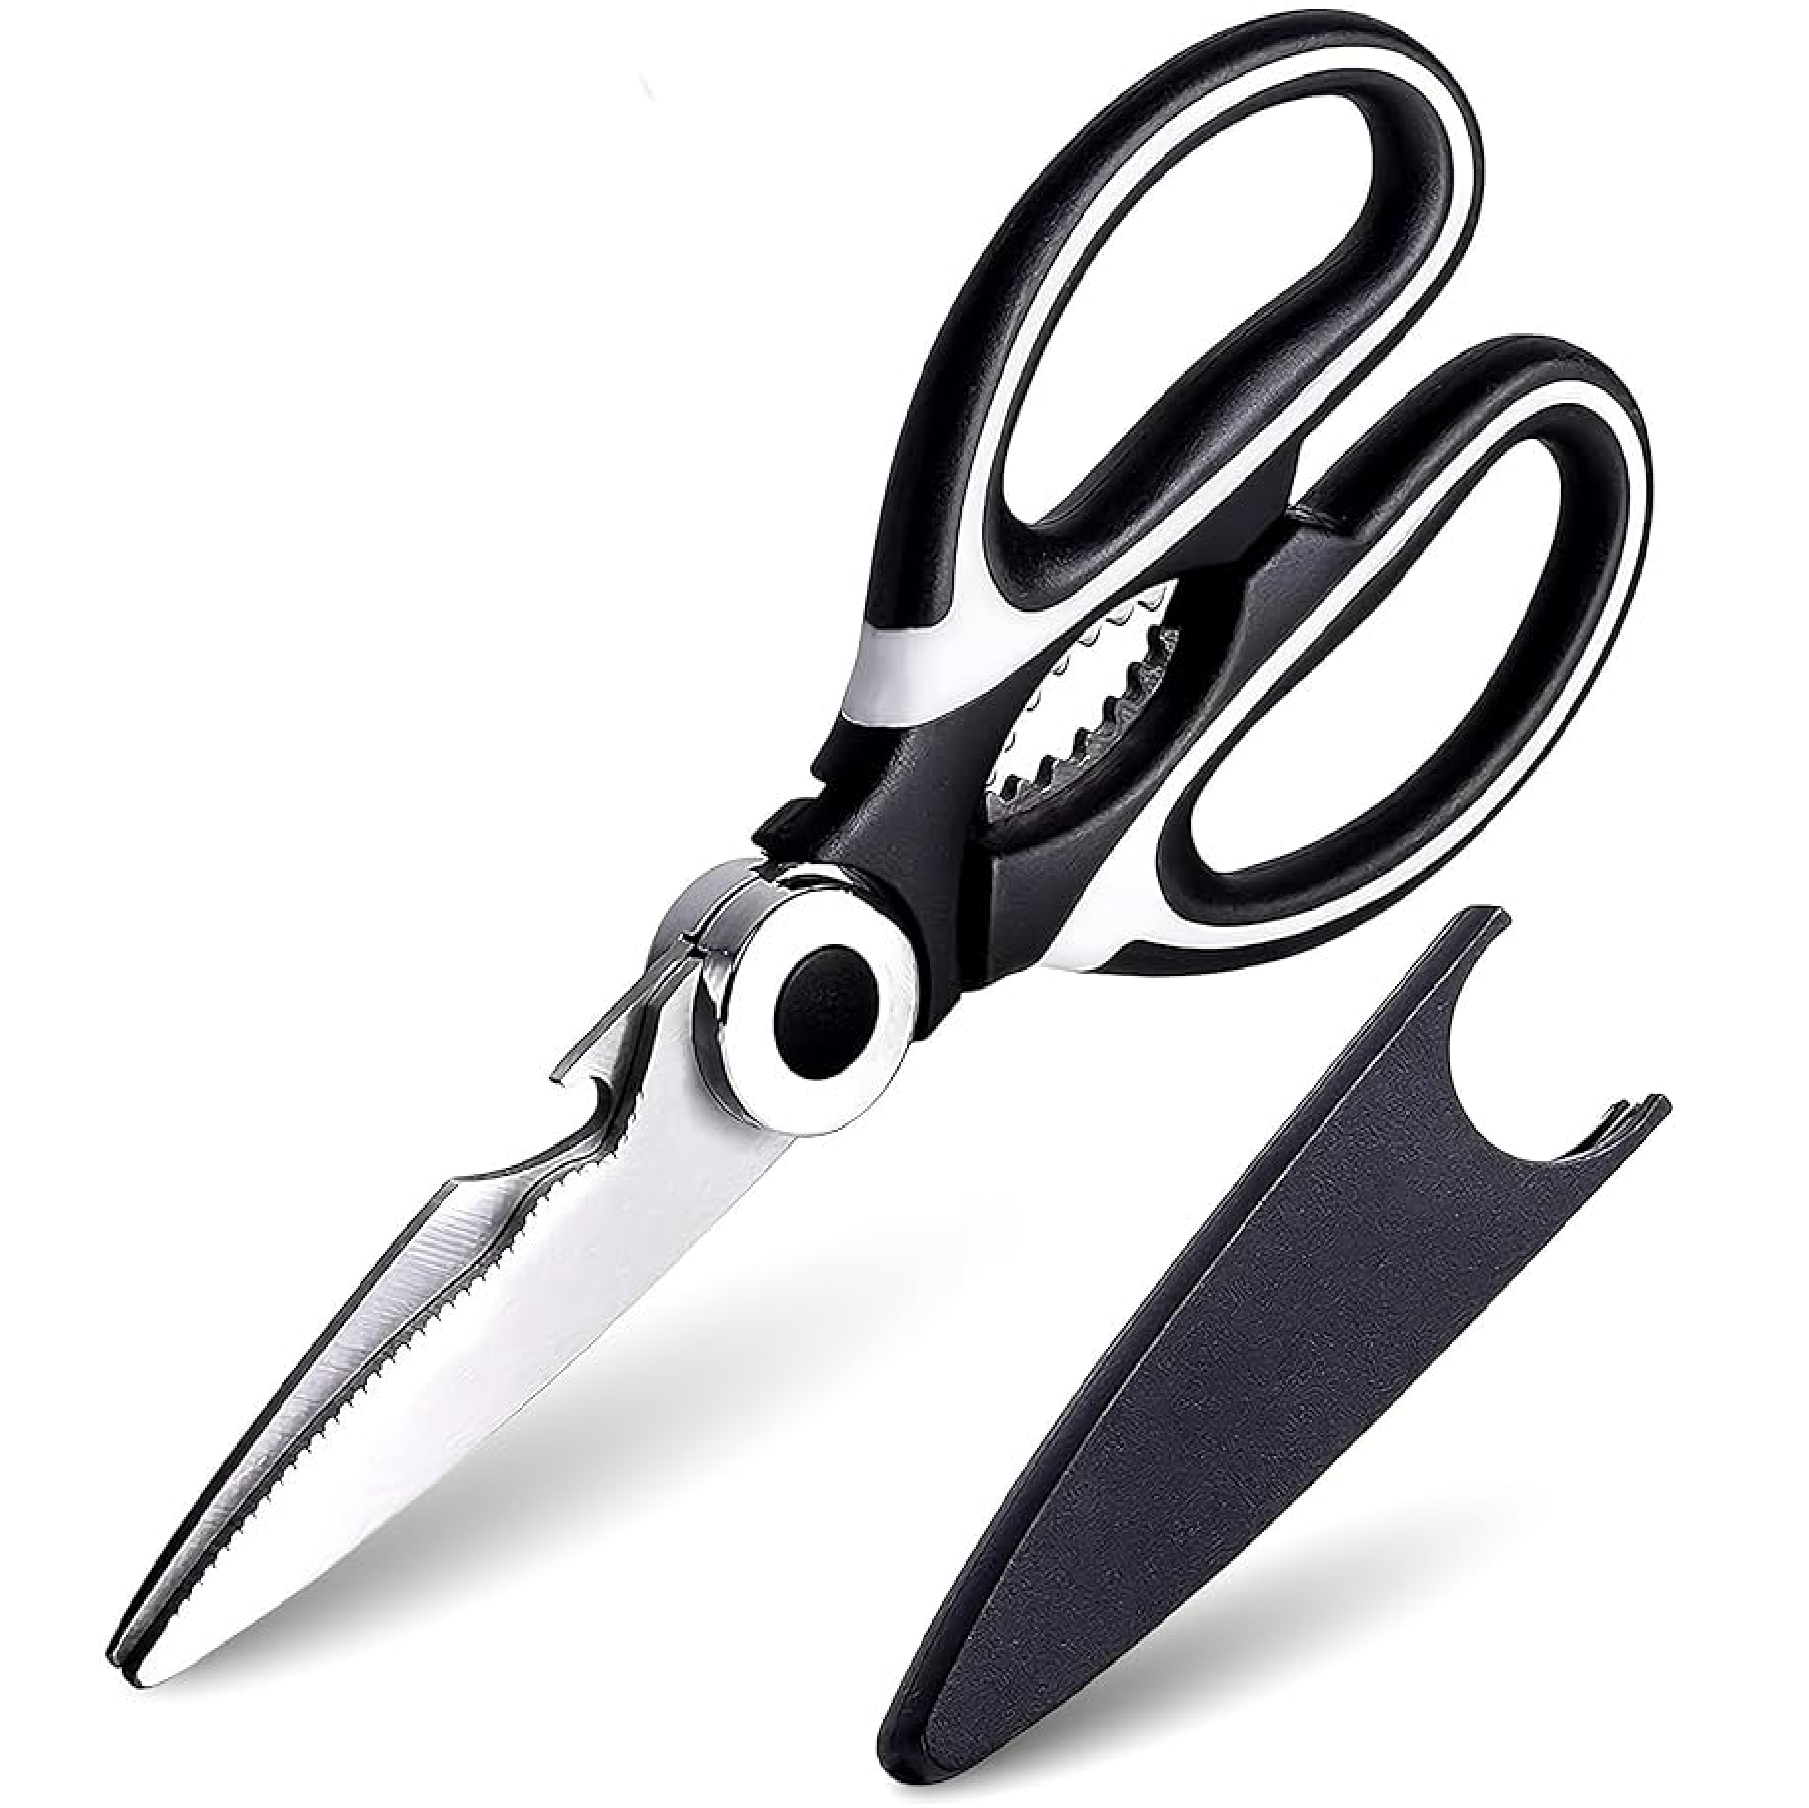 HardwareCity Stainless Steel KITCHEN SCISSORS With COVER T018